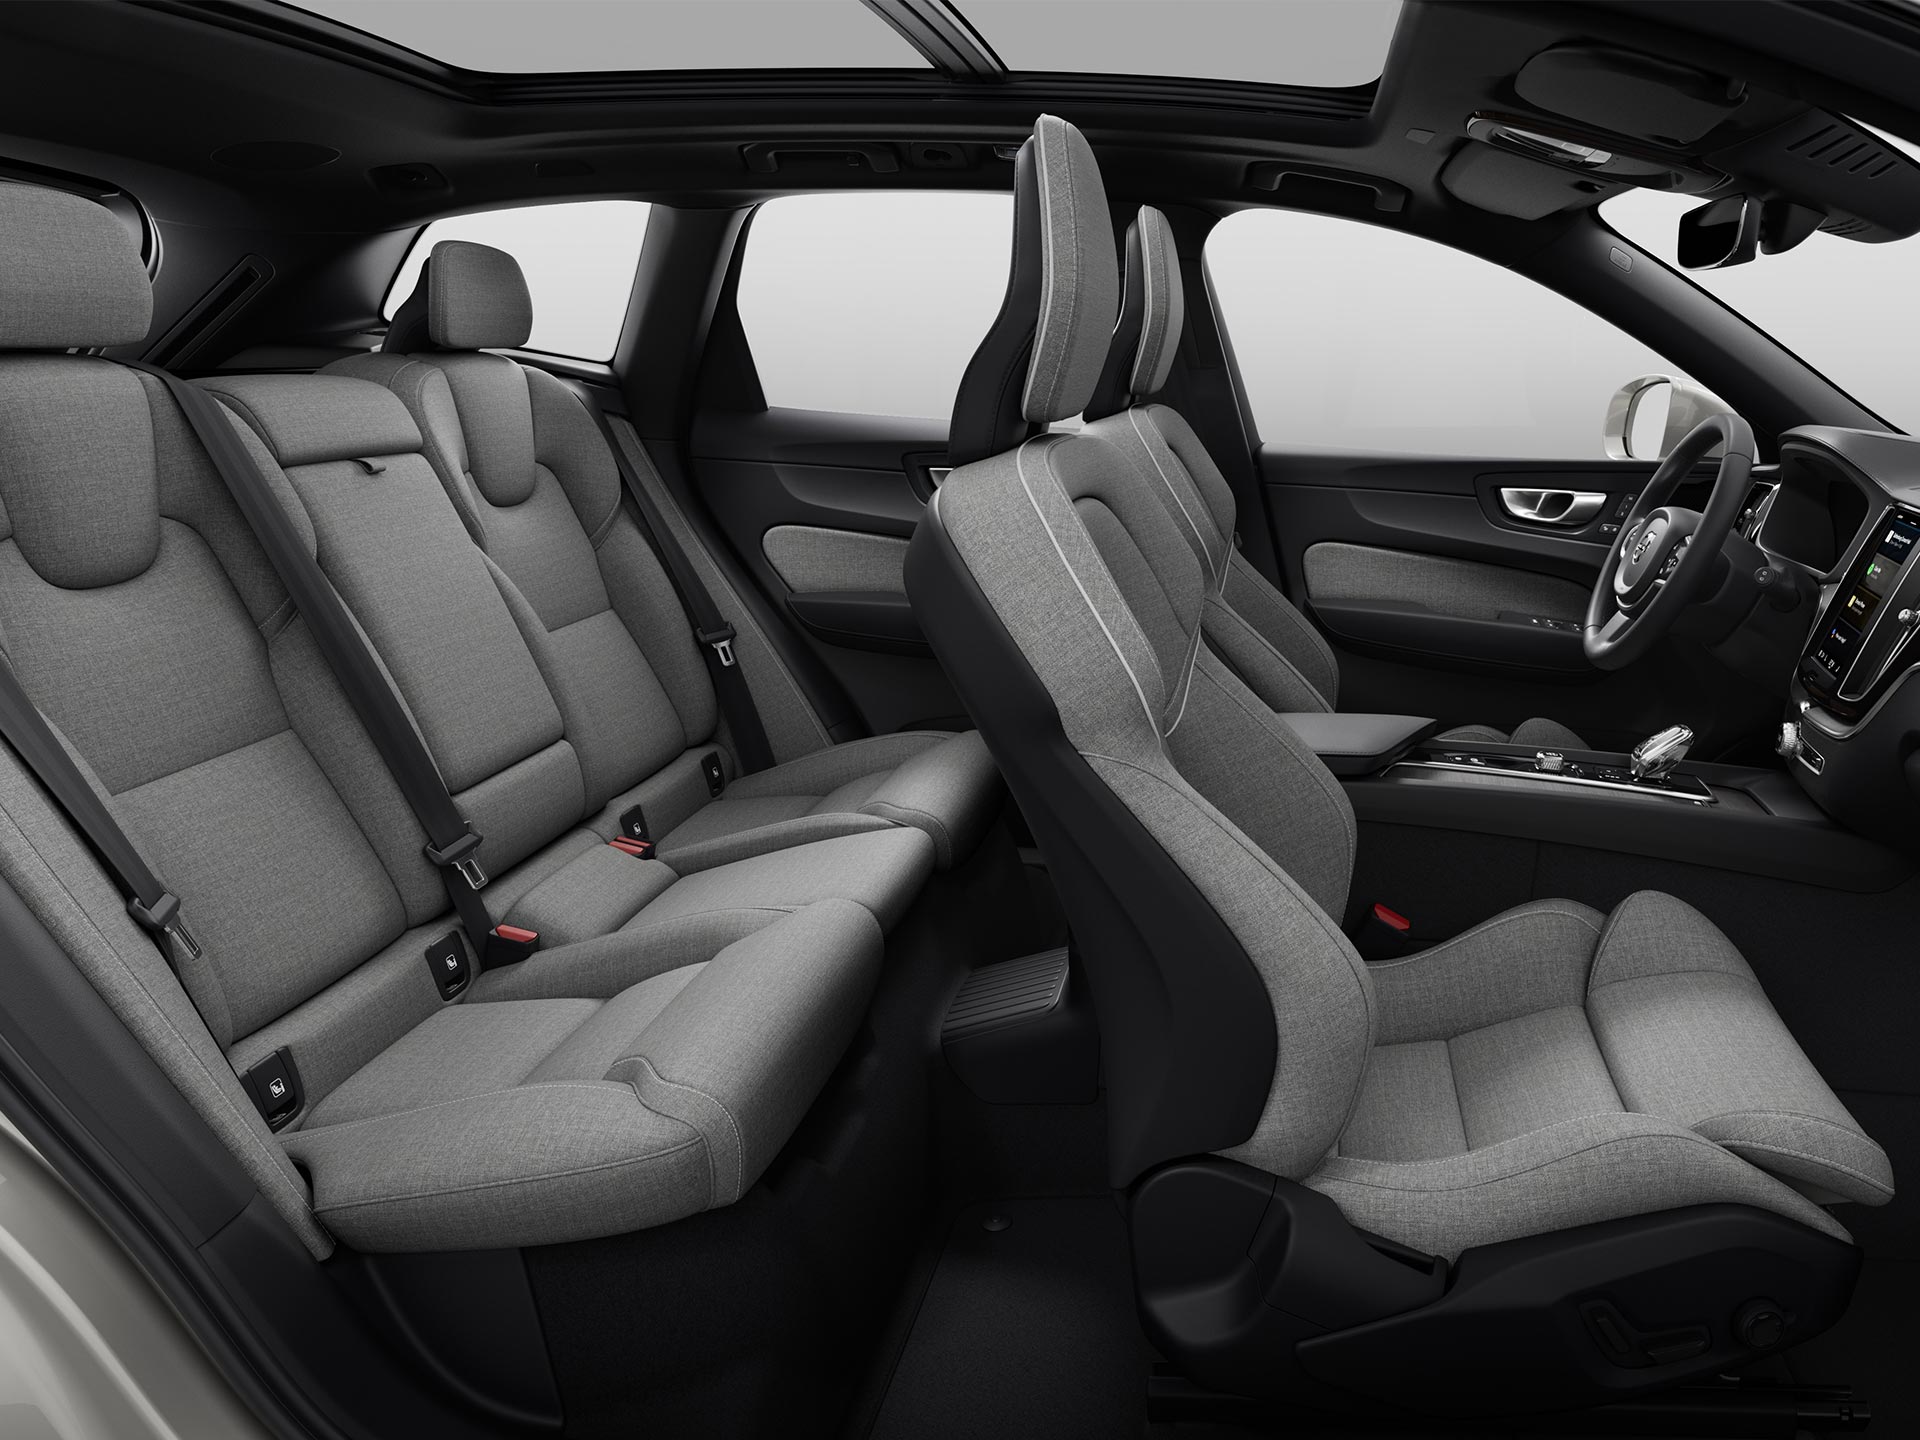 Wide-angle view of the spacious cabin and upholstered seats of a Volvo SUV.